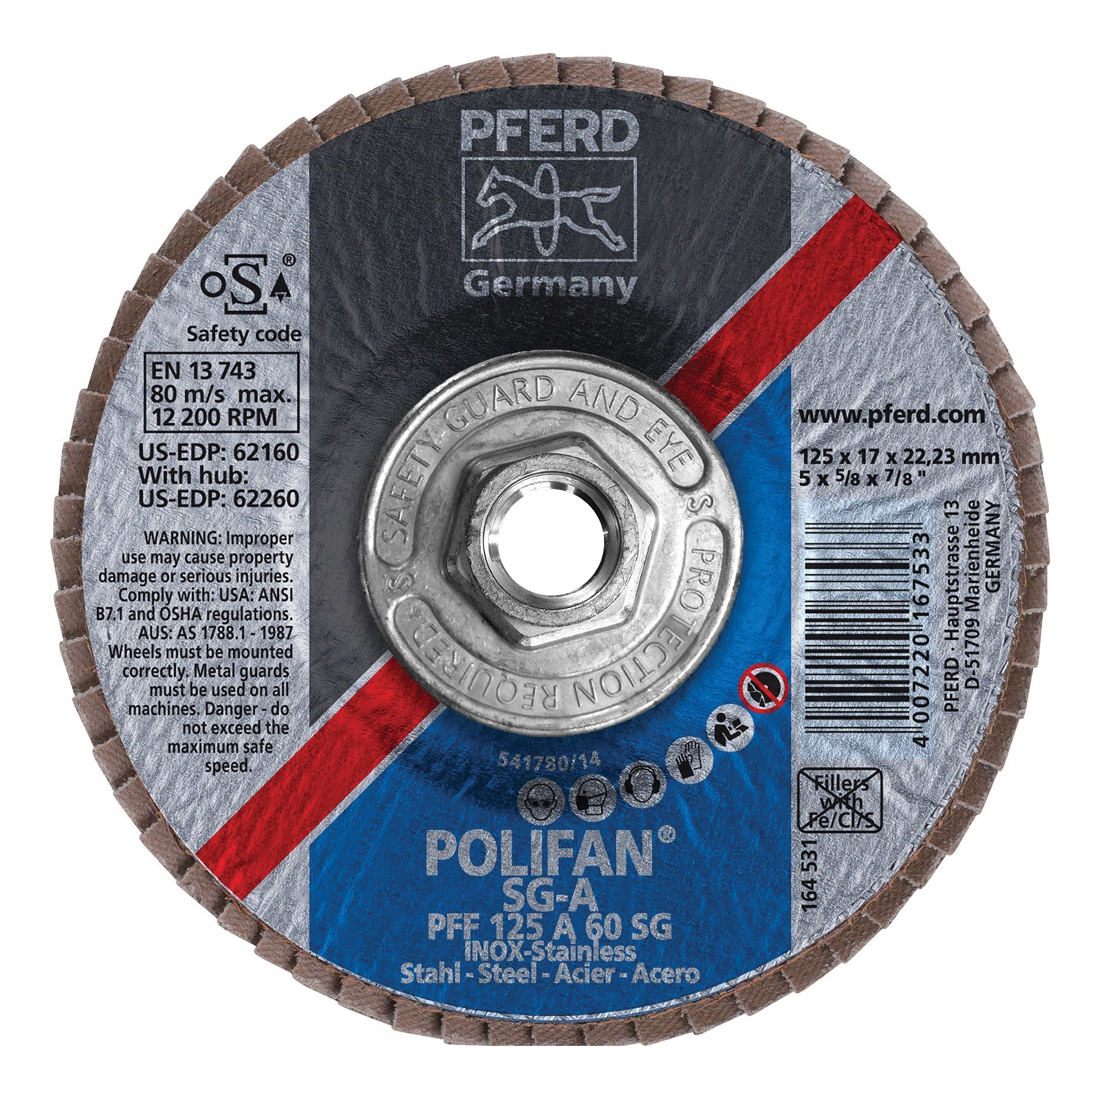 PFERD Polifan® 62260 Performance Line SG A Threaded Coated Abrasive Flap Disc, 5 in Dia, 60 Grit, Aluminum Oxide Abrasive, Type 27 Flat Disc